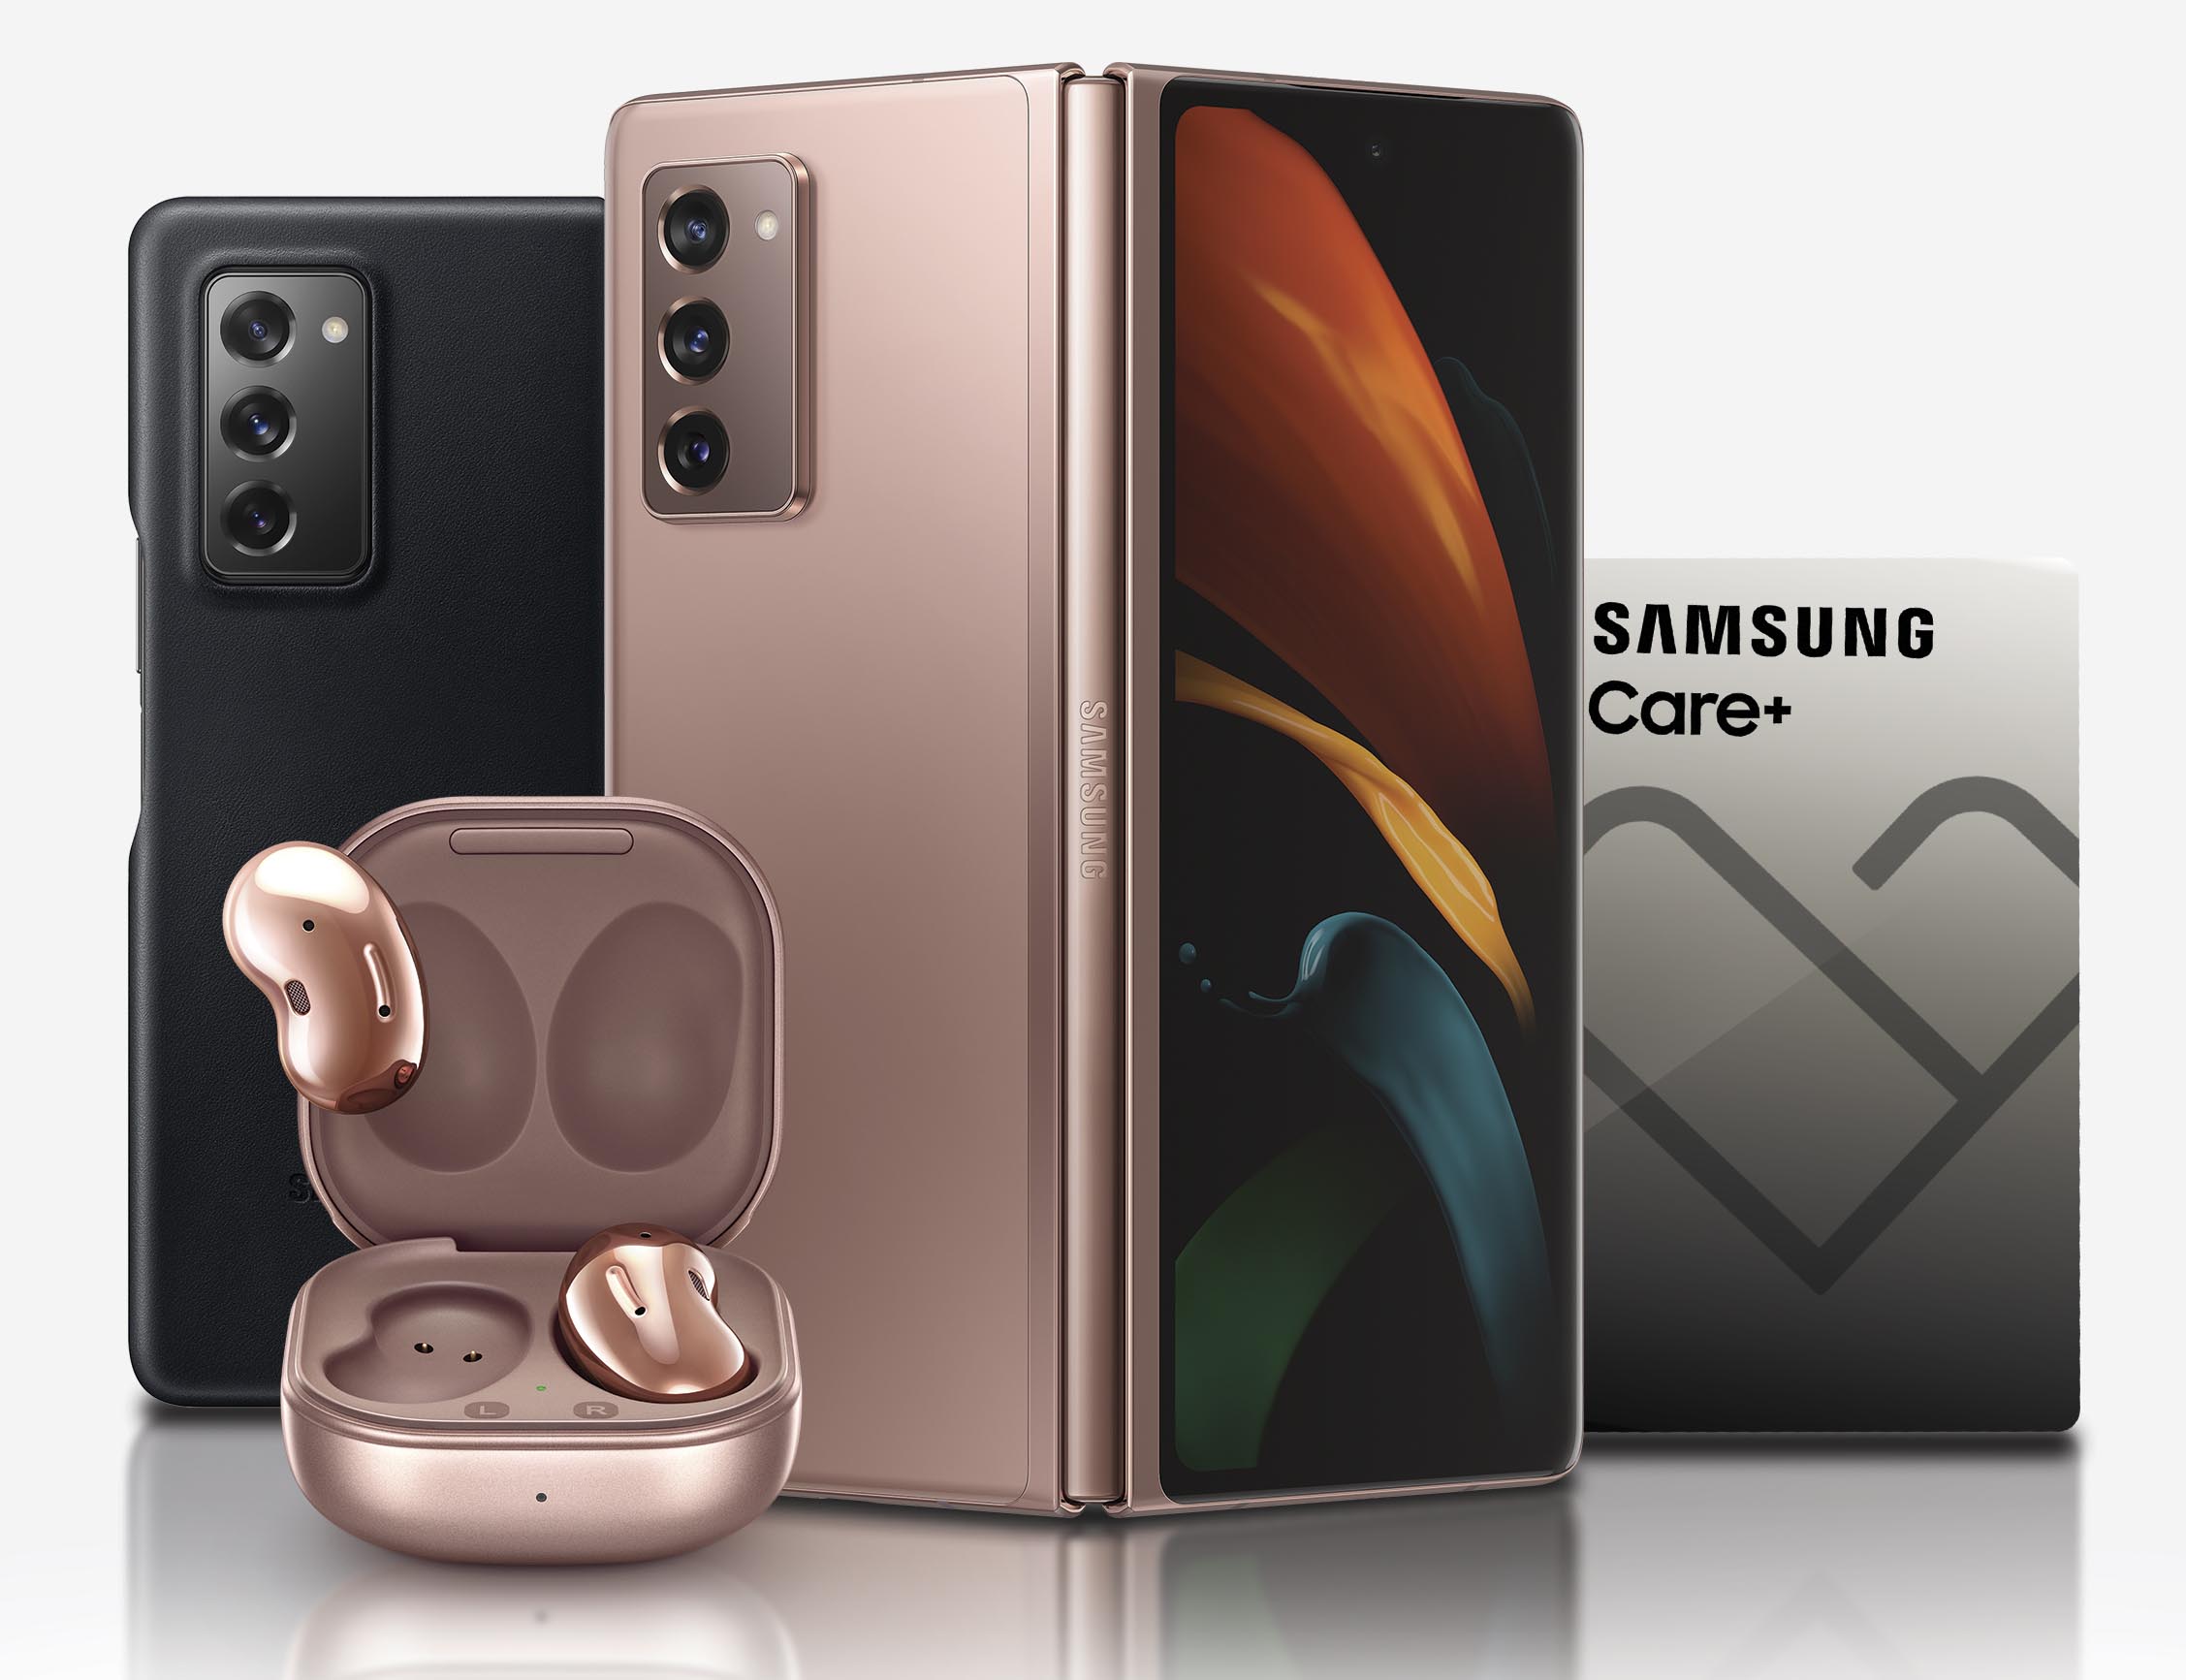 SAMSUNG Galaxy Z Fold2 sold out via pre-order! Available in stores starting September 25